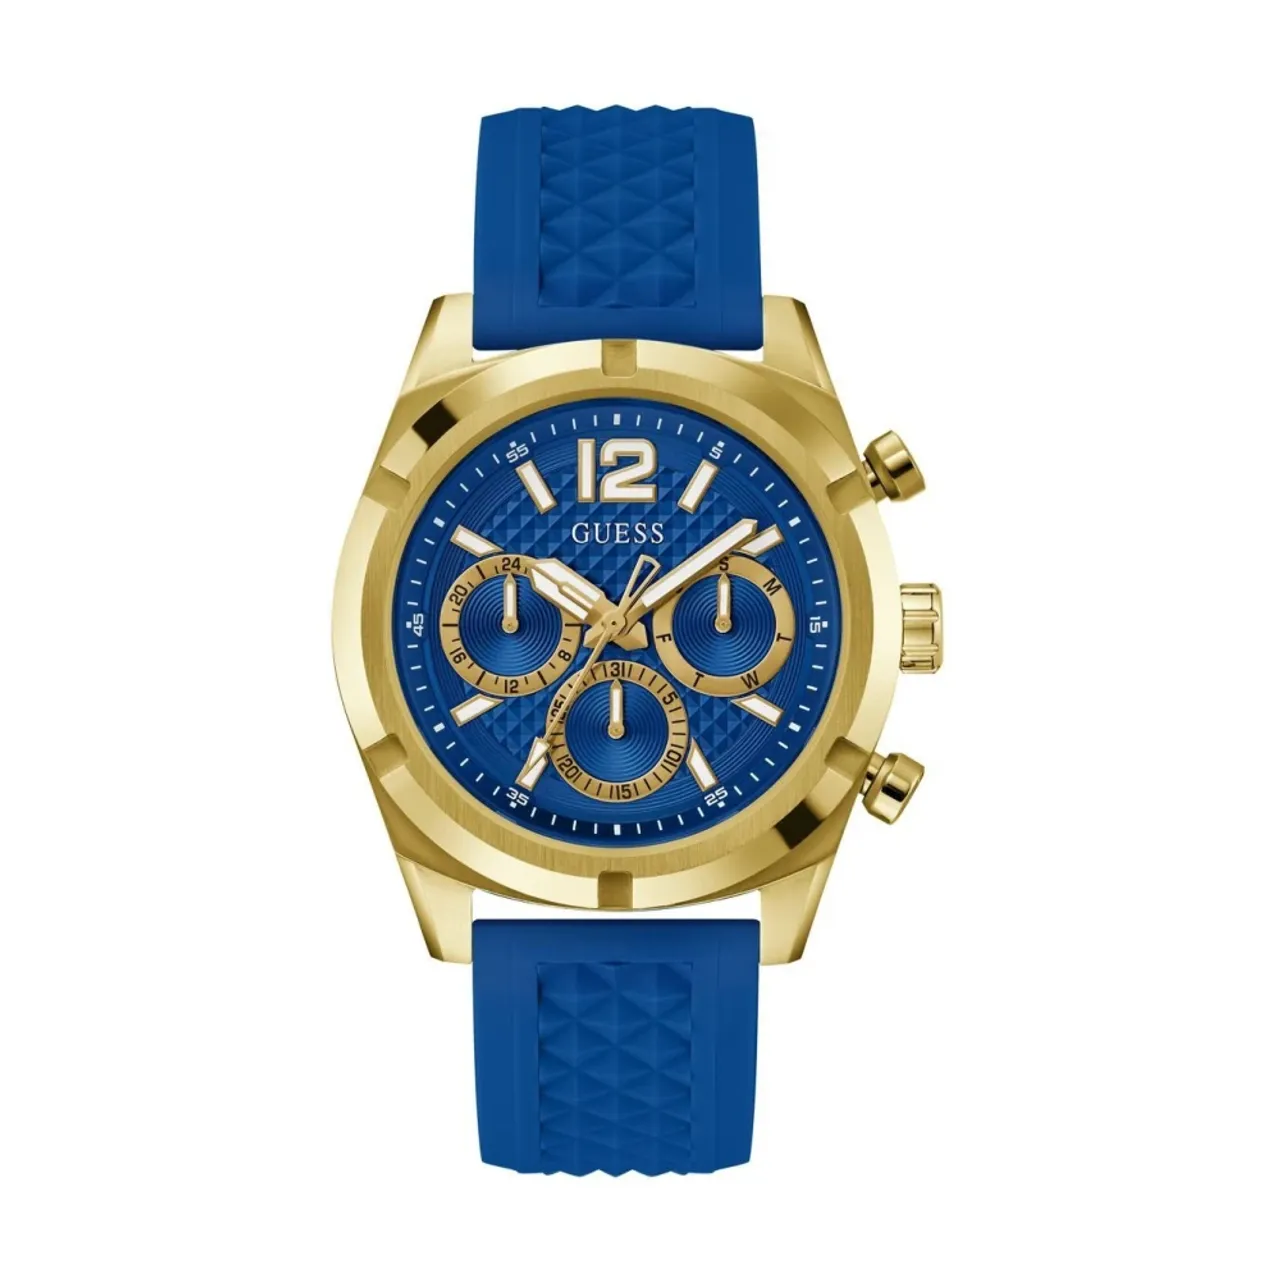 Widerstand Multifunktions Blau Gold Uhr Guess